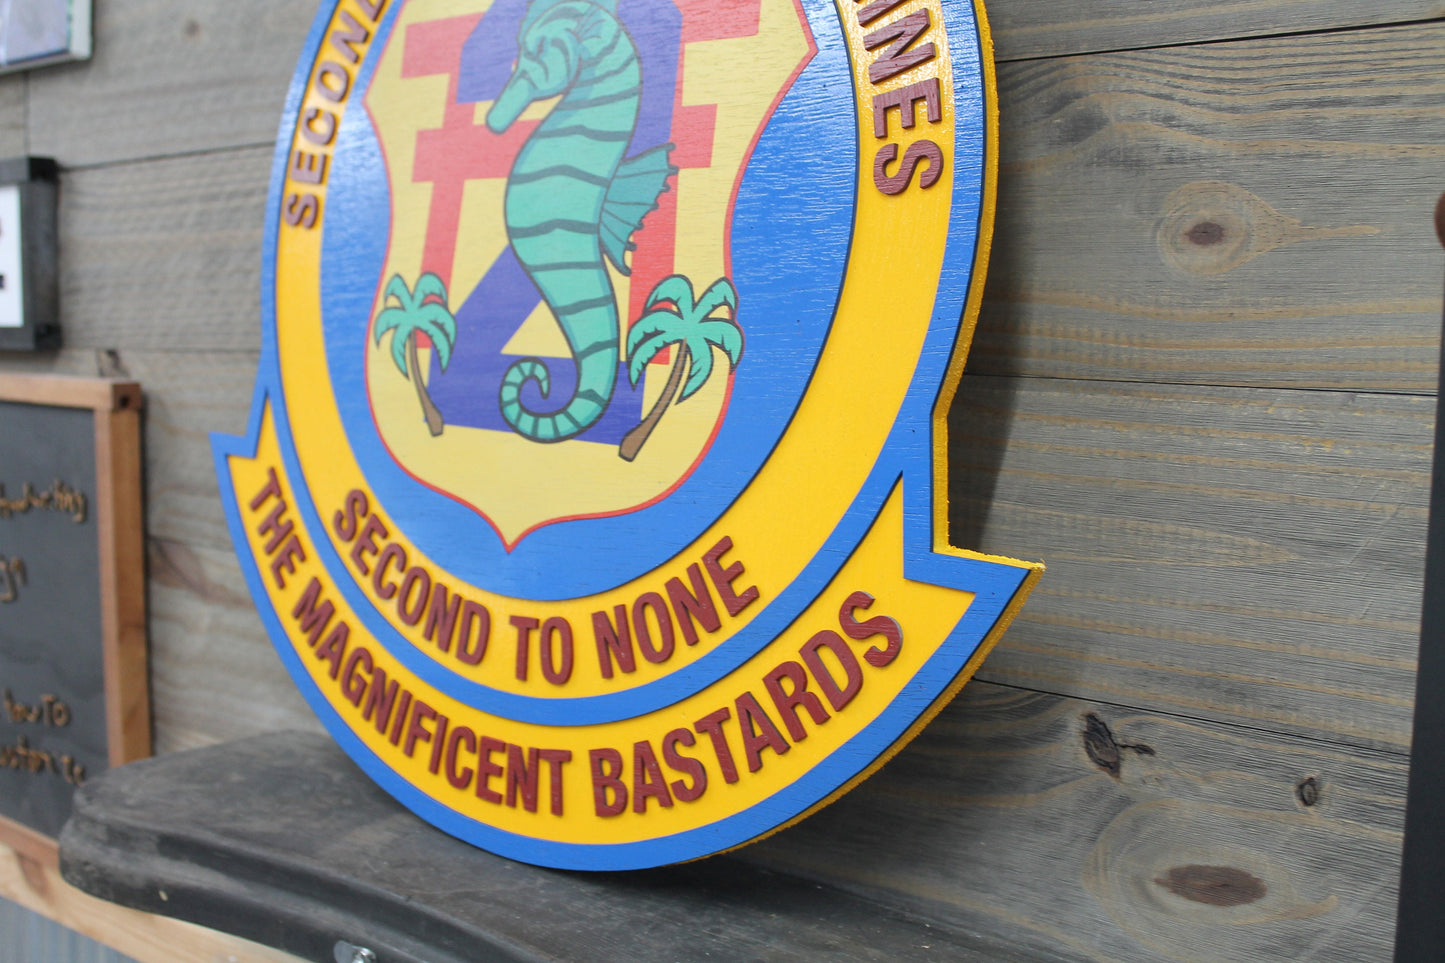 Battalion Seahorse Palm Marines Military Sheild Badge of Honor Personalize Sign Contoured Award Company 3D Made to Order Wooden Handmade